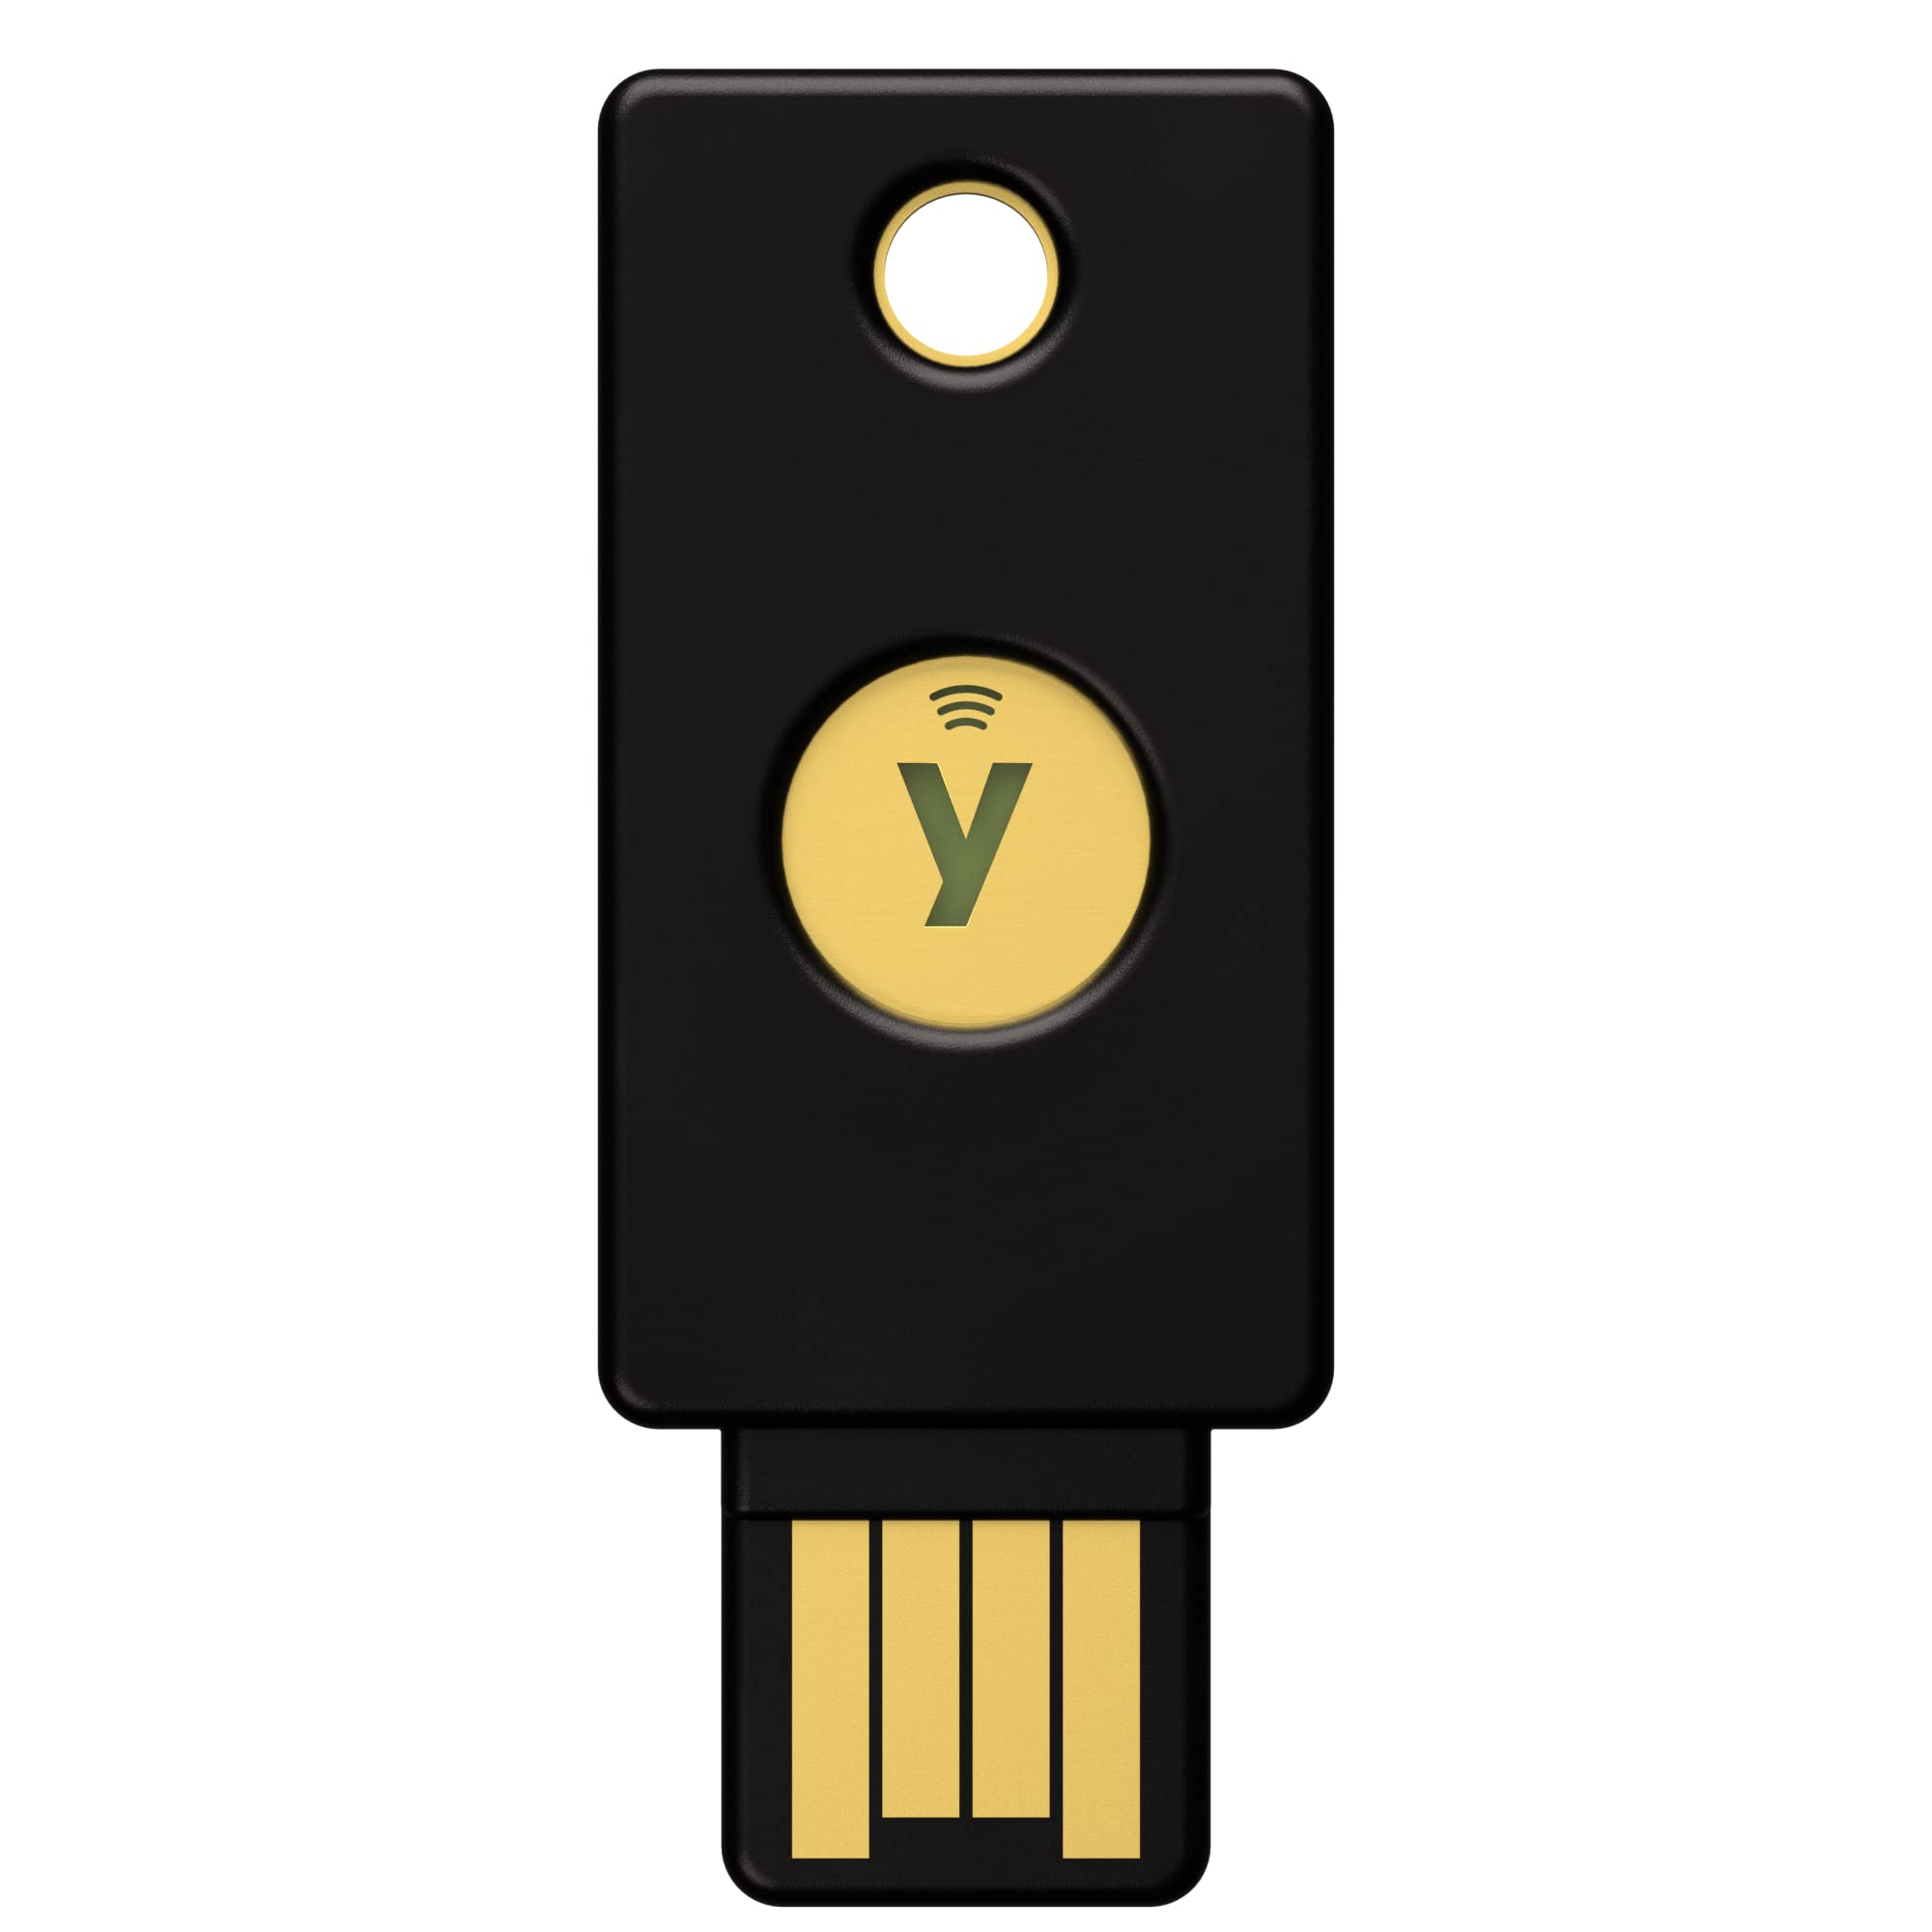 Yubico - YubiKey 5 NFC - Two-Factor authentication (2FA) Security Key, Connect via USB-A or NFC, FIDO Certified - Protect Your Online Accounts